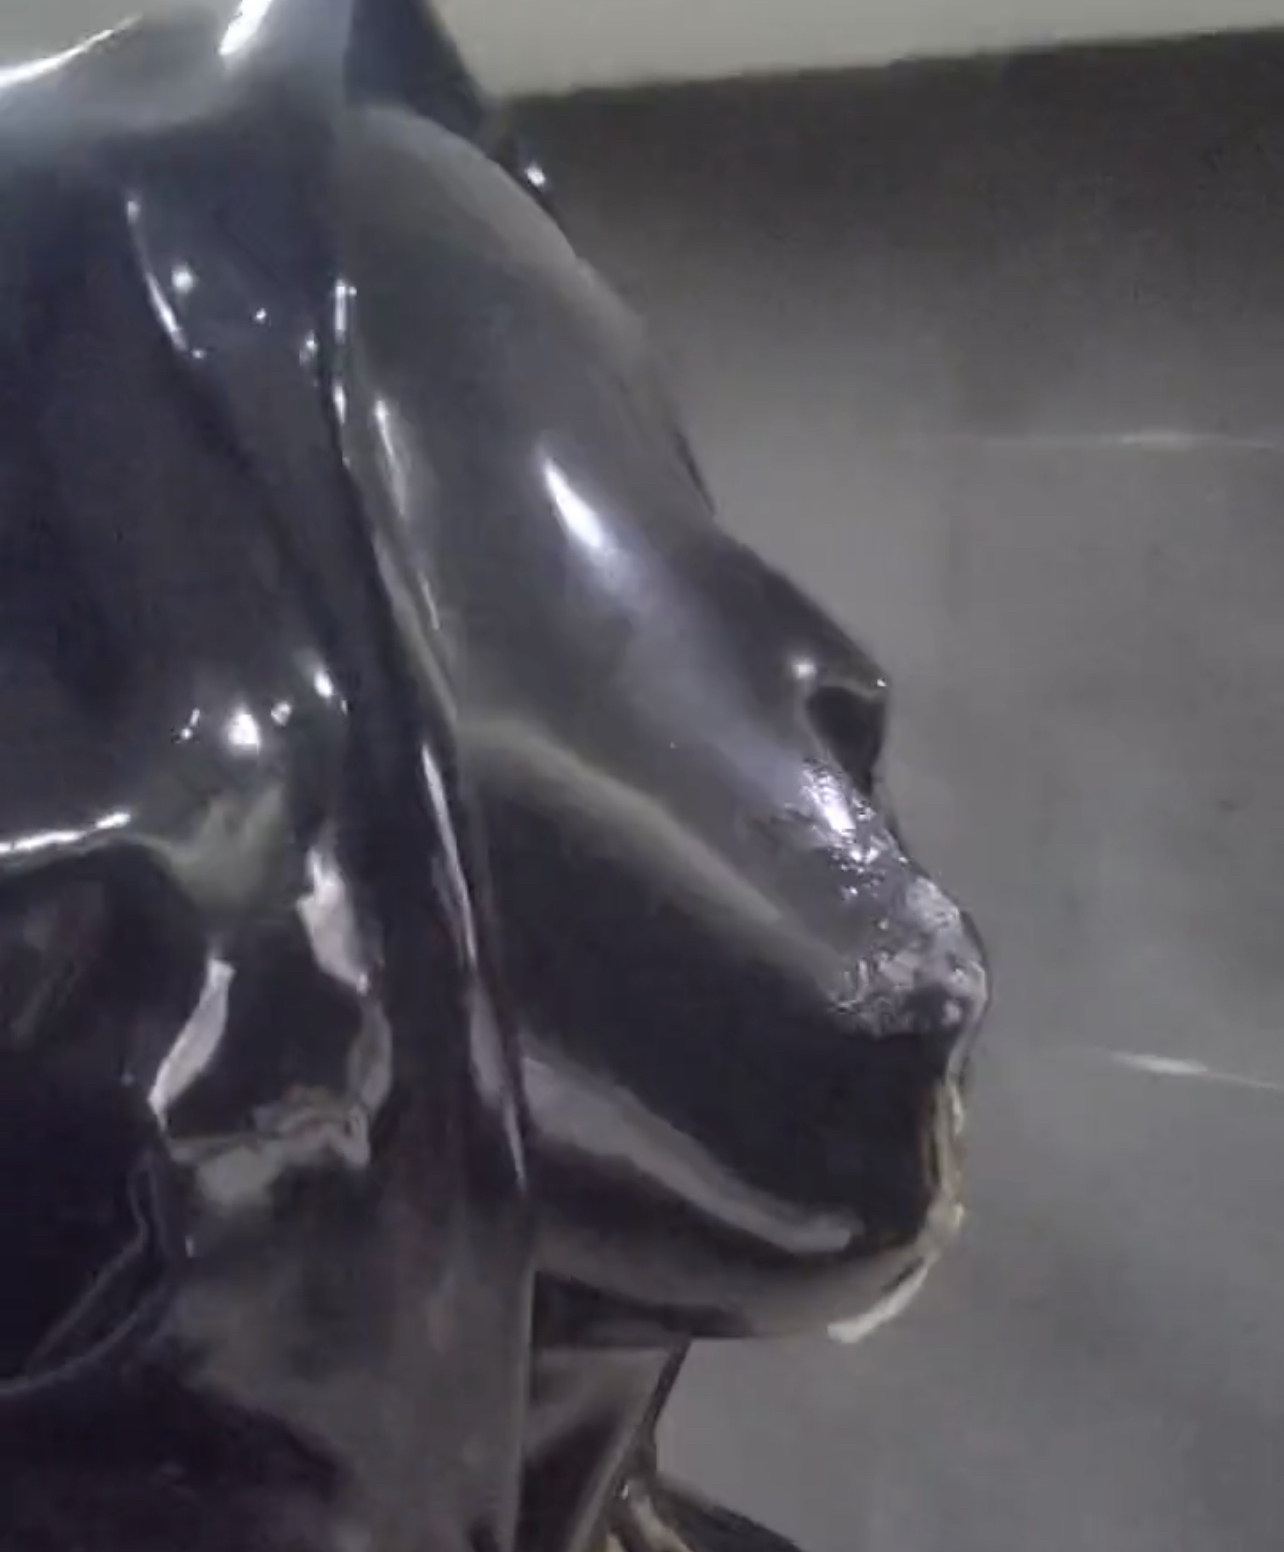 Gimp drooling in his rubber mask